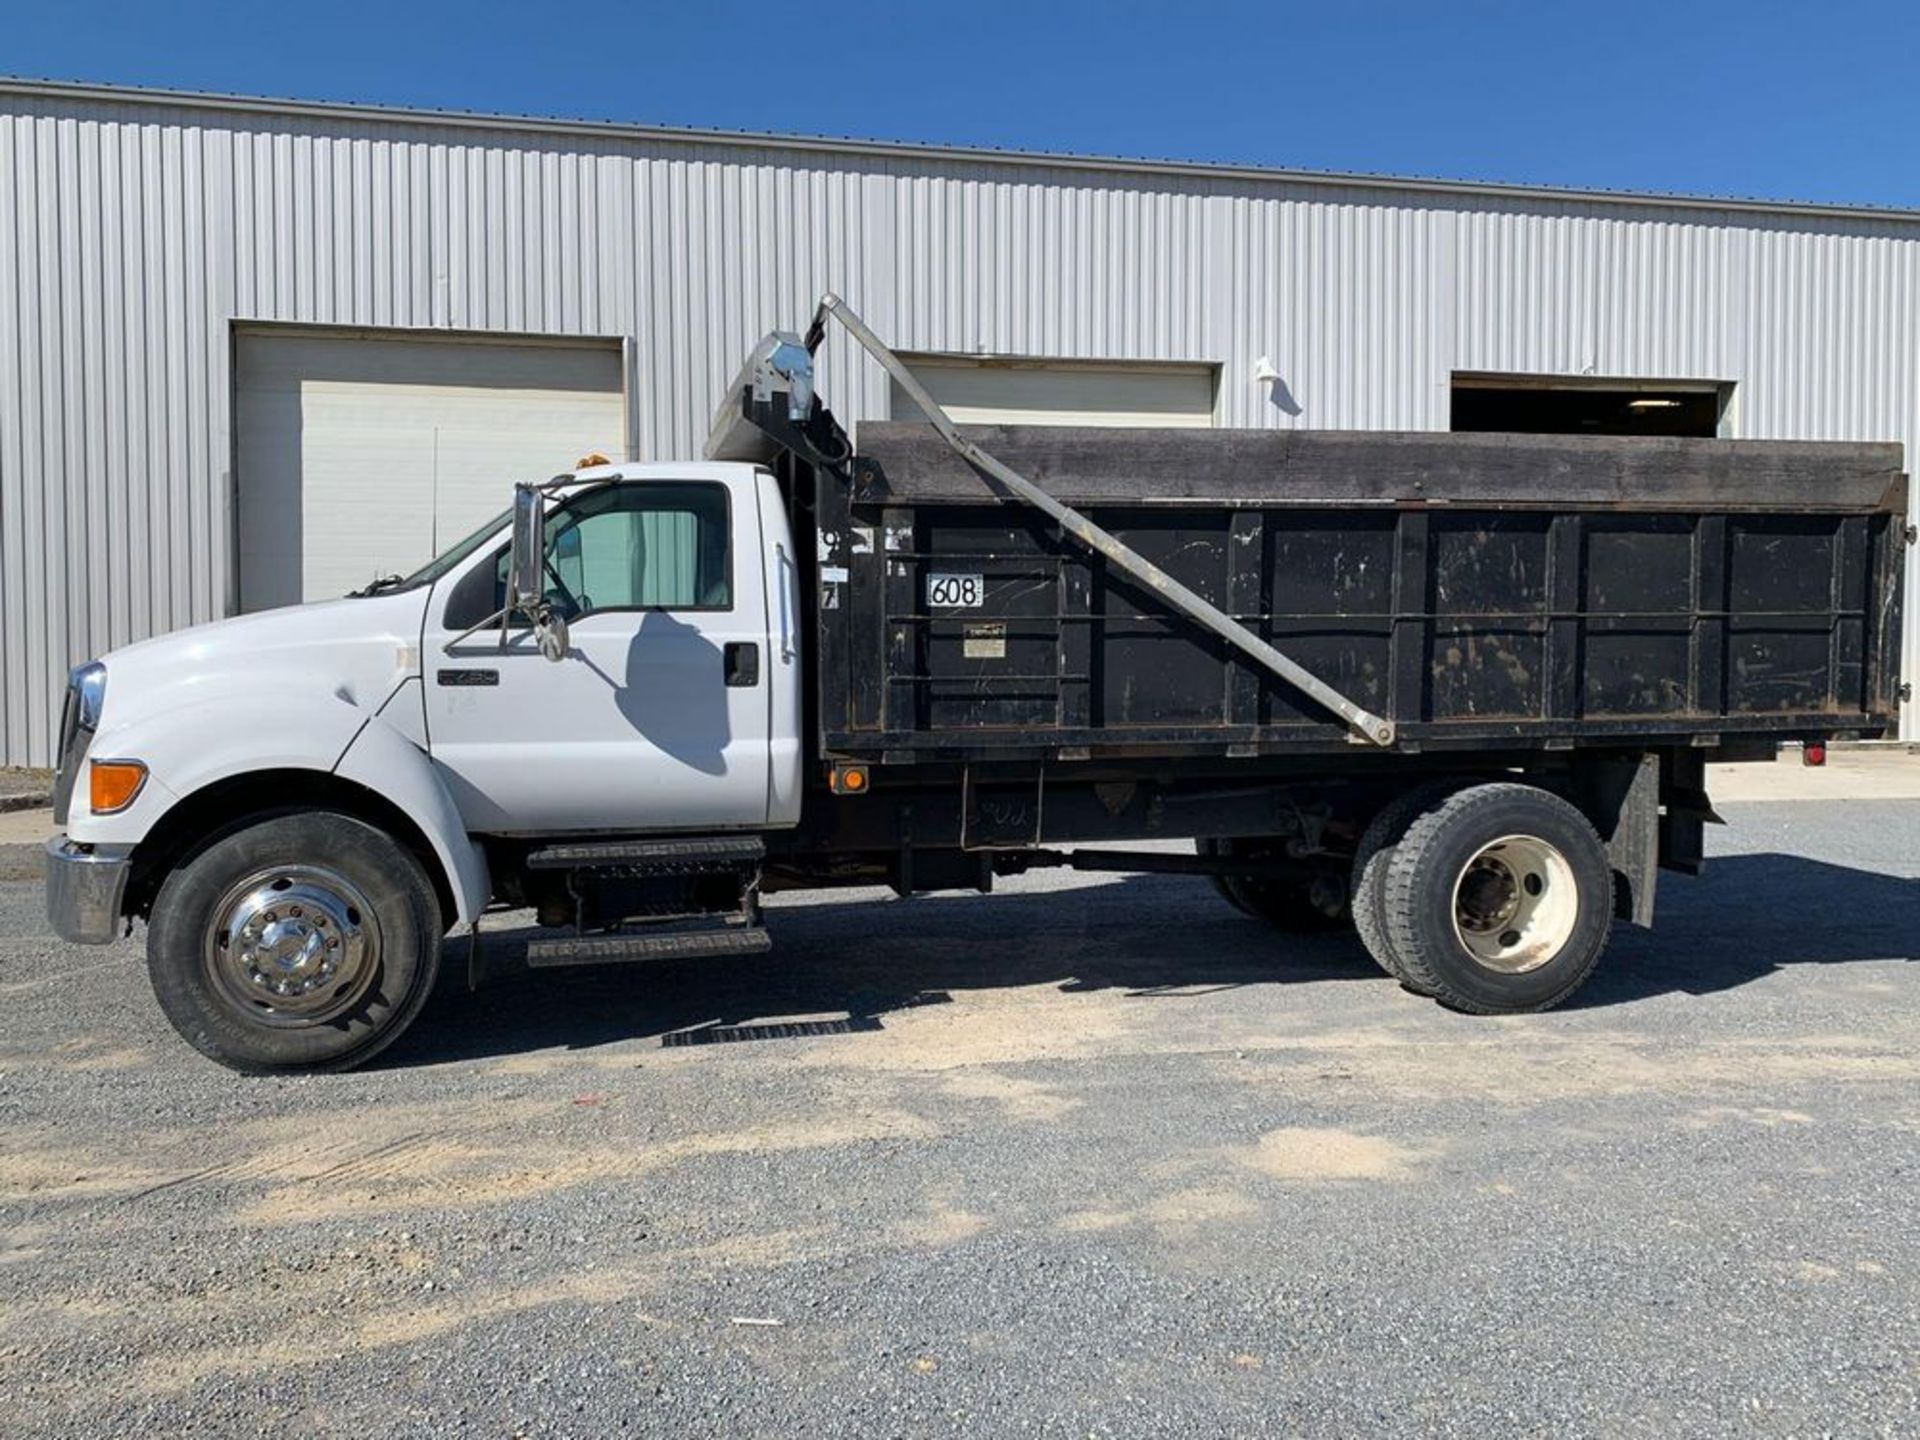 2007 FORD F750 S/A DUMP TRUCK - Image 2 of 48